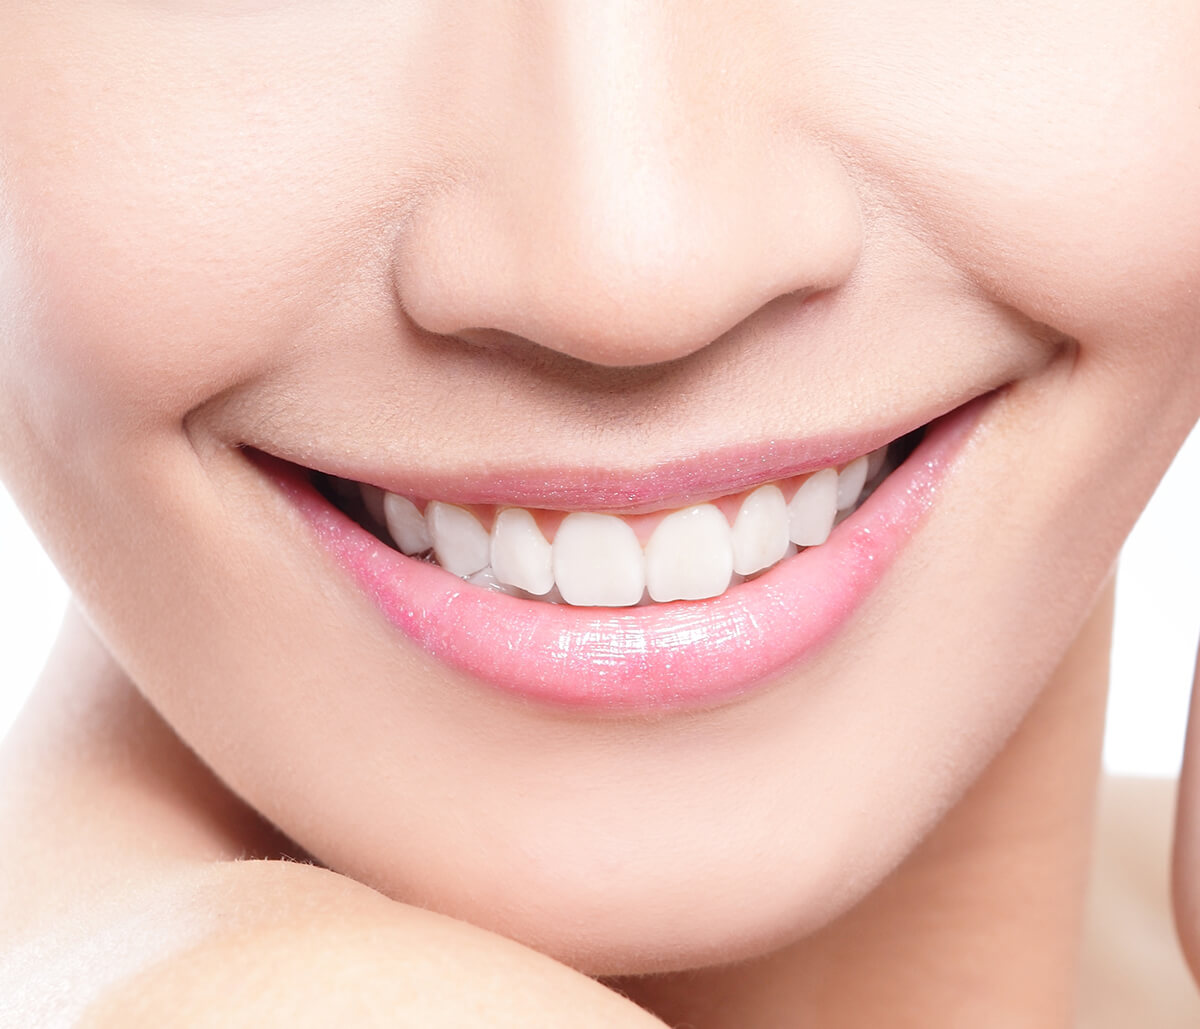 Reclaim the Smile You Once Had, Get the Smile You Have Always Wanted: Cosmetic Dental Care in Turlock, CA Area